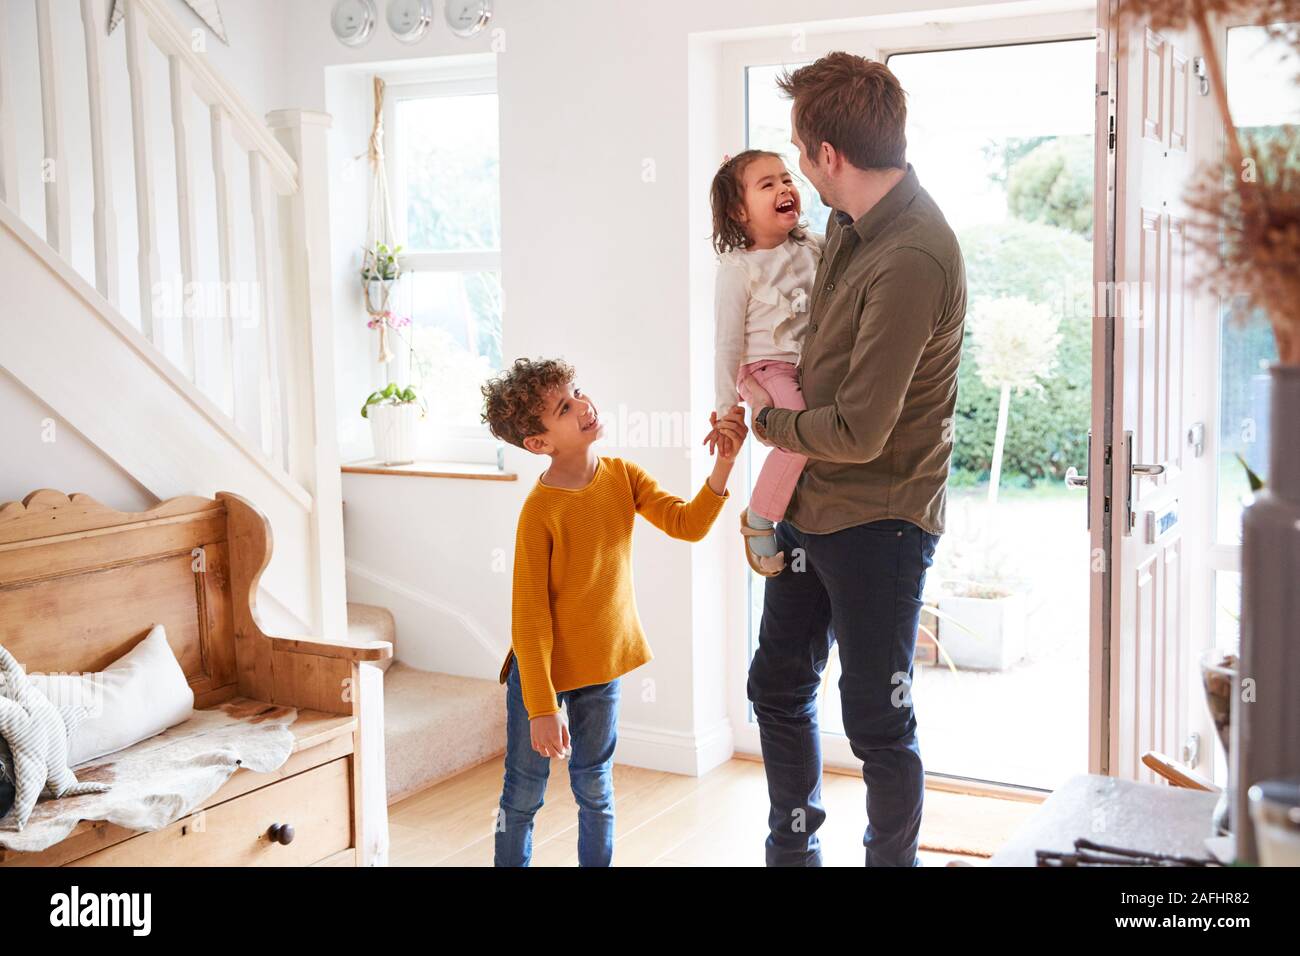 Single Father Returning Home After Trip Out With Excited Children Running Ahead Stock Photo